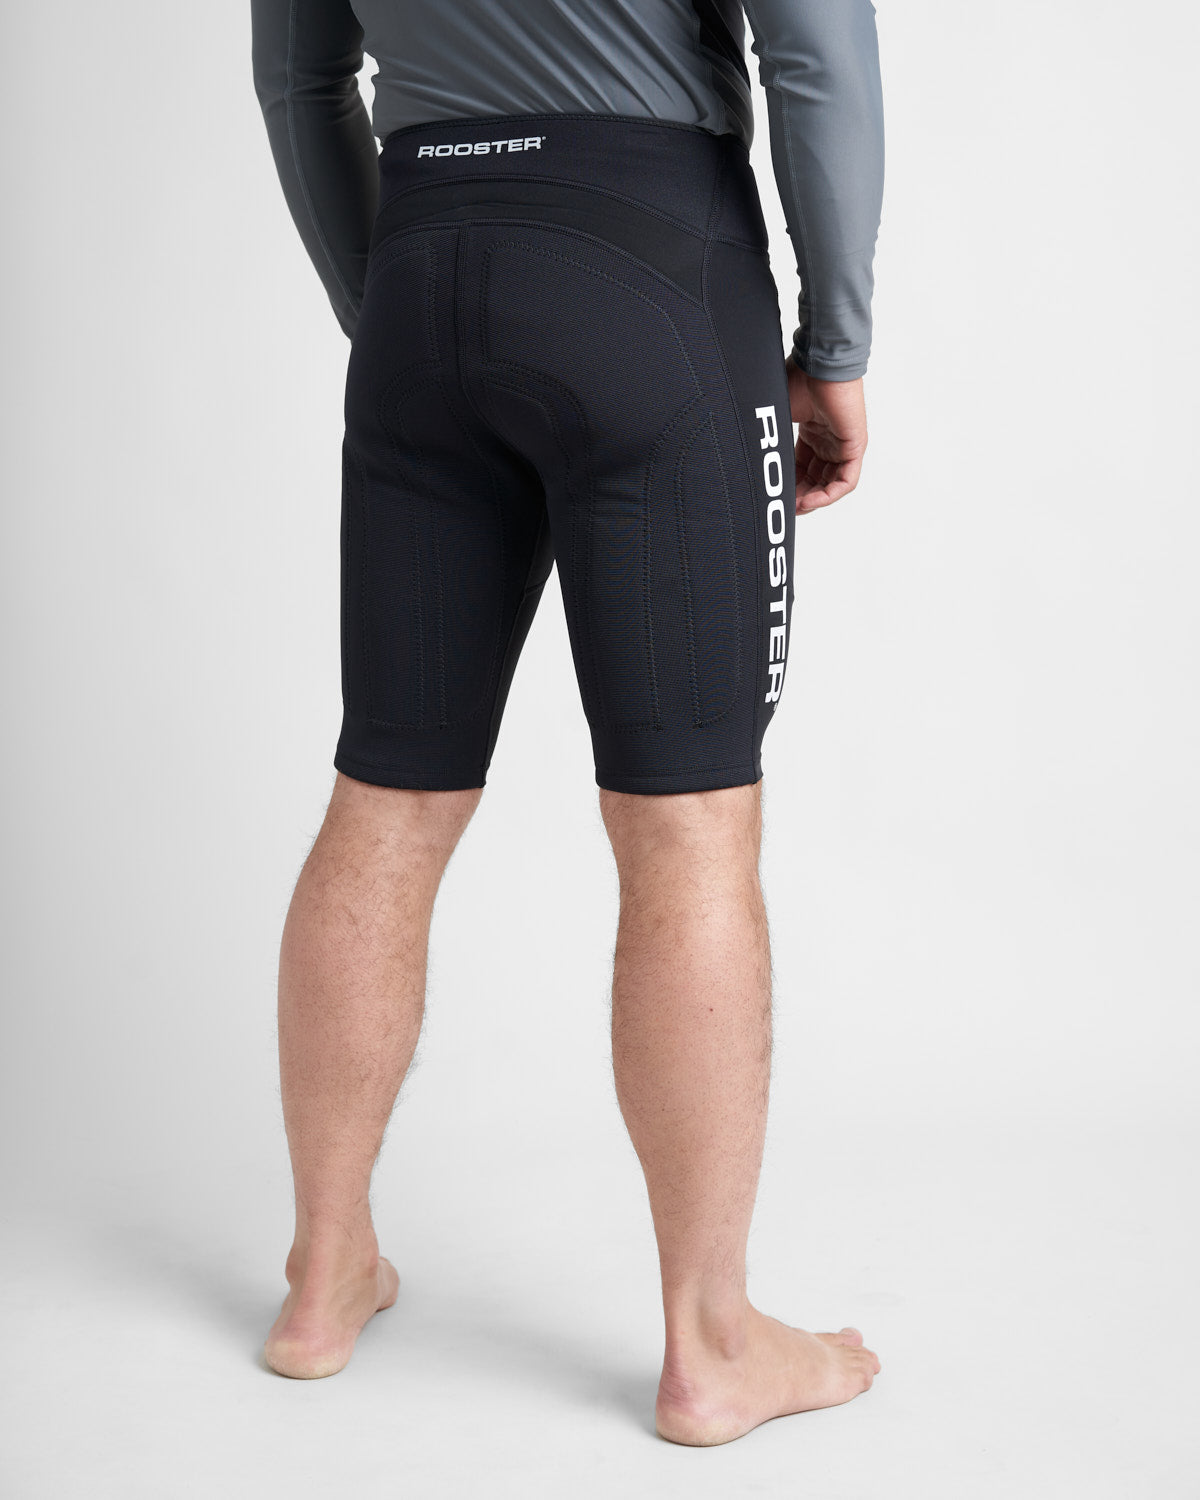 Rooster RaceArmour Lite Shorts